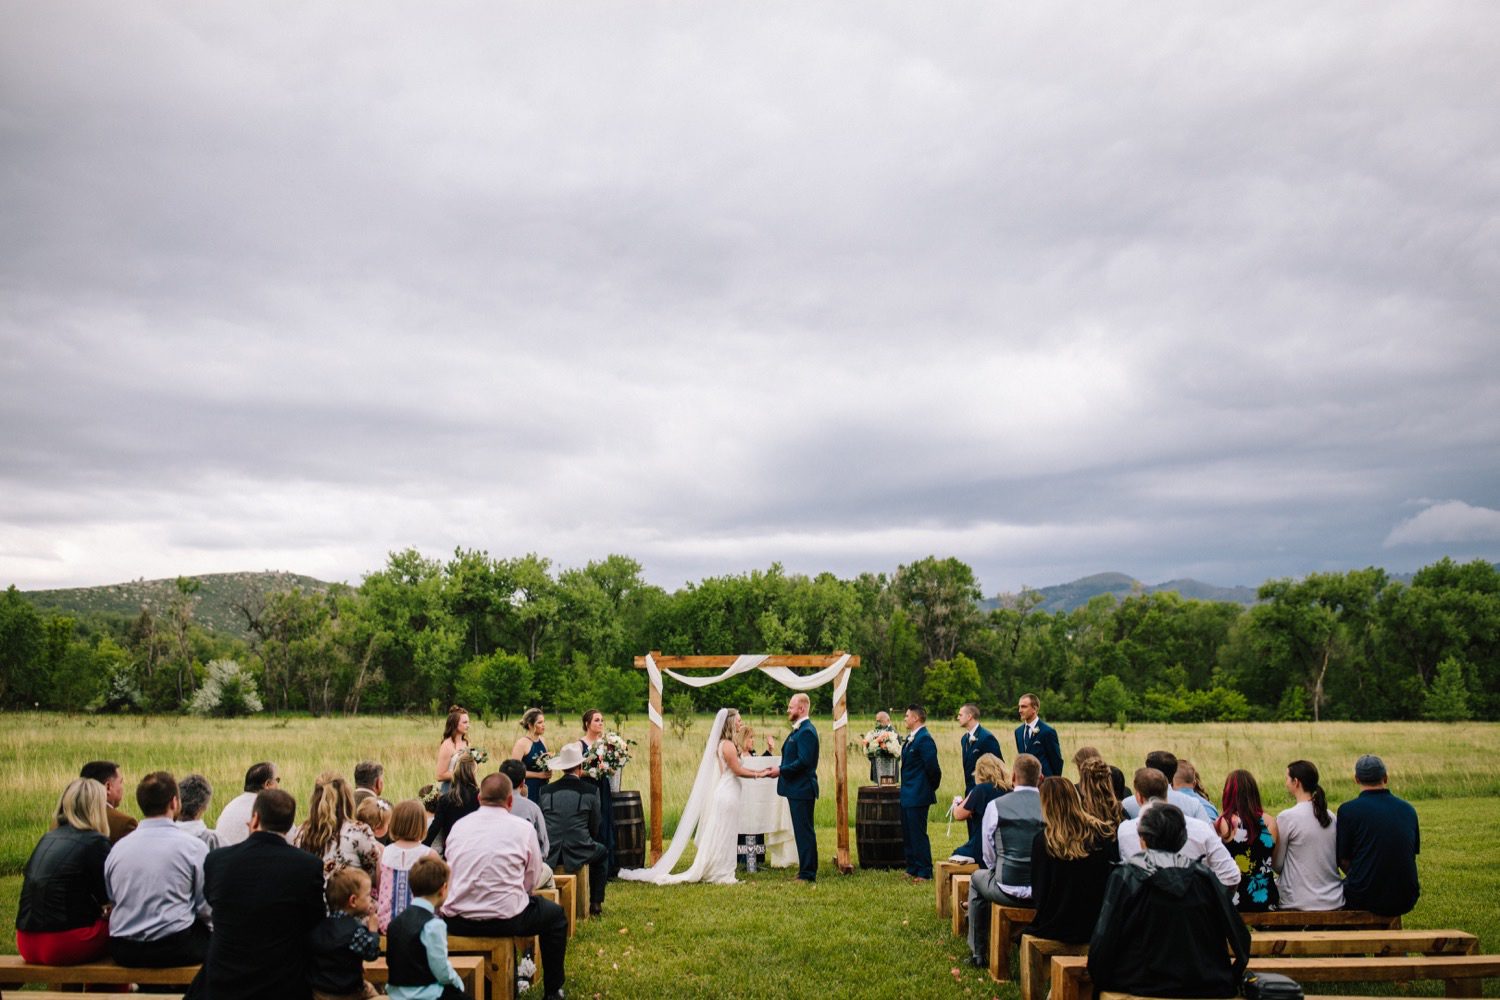 Rist Canyon Inn Wedding, Fort Collins Wedding, Colorado Wedding, Colorado Elopement, Colorado Mountain Wedding, Colorado Wedding Photographer, Colorado Elopement Photographer, Spring Wedding, Wedding Photography, Documentary Wedding Photography, Photojournalistic Wedding Photography, Wedding Inspiration, Wedding Ideas, Wedding Photos, Anna Be Wedding Dress, Compass Rose Floral, Cathedral Veil, Bride and Groom, Wedding Ceremony, Outdoor Wedding Ceremony, Wooden Altar, Wedding Arch with Tulle